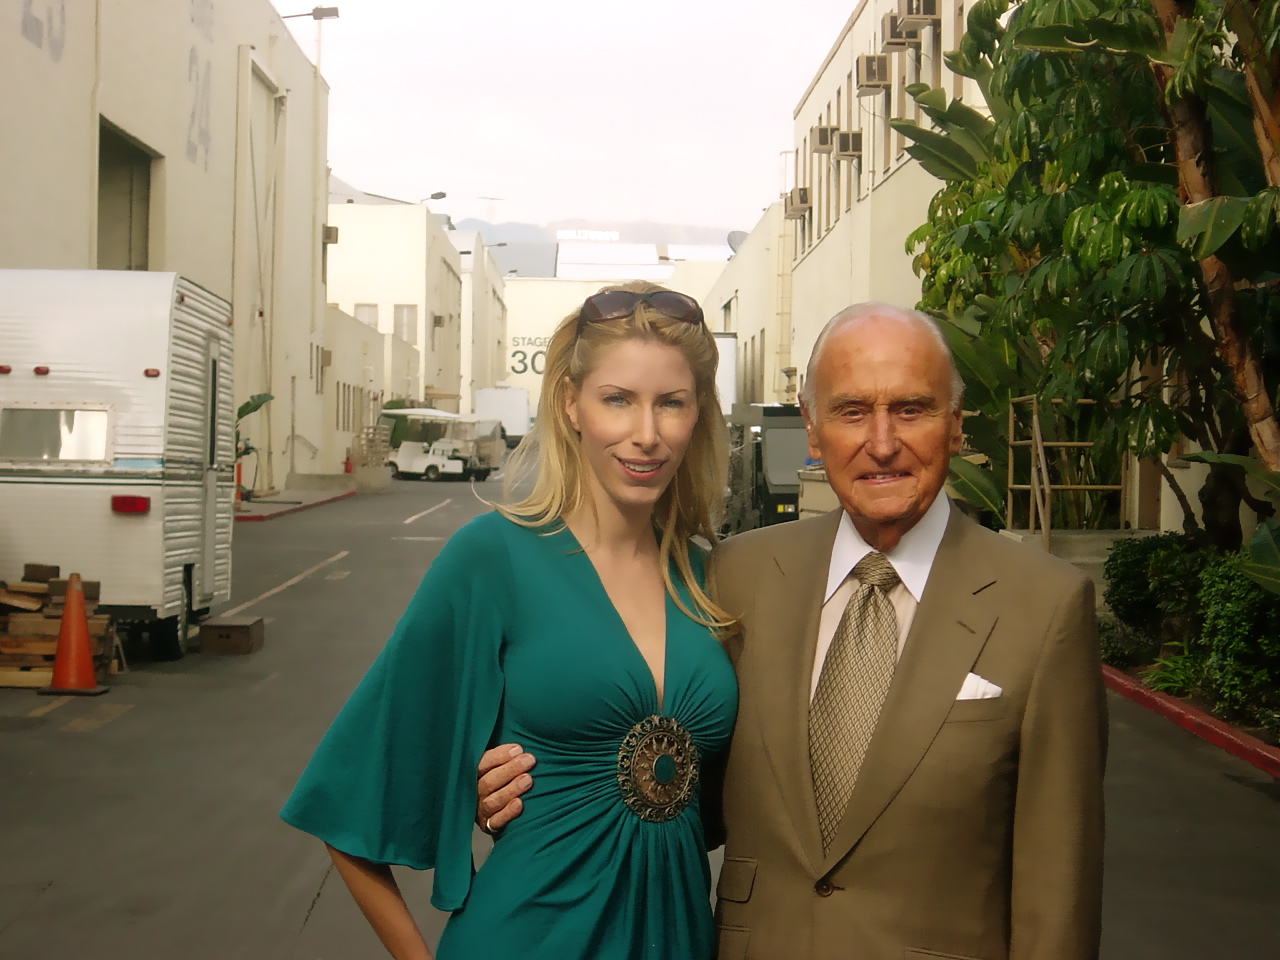 A.C. Lyles & Erika Mariani at Paramount Studio Lot in L.A.